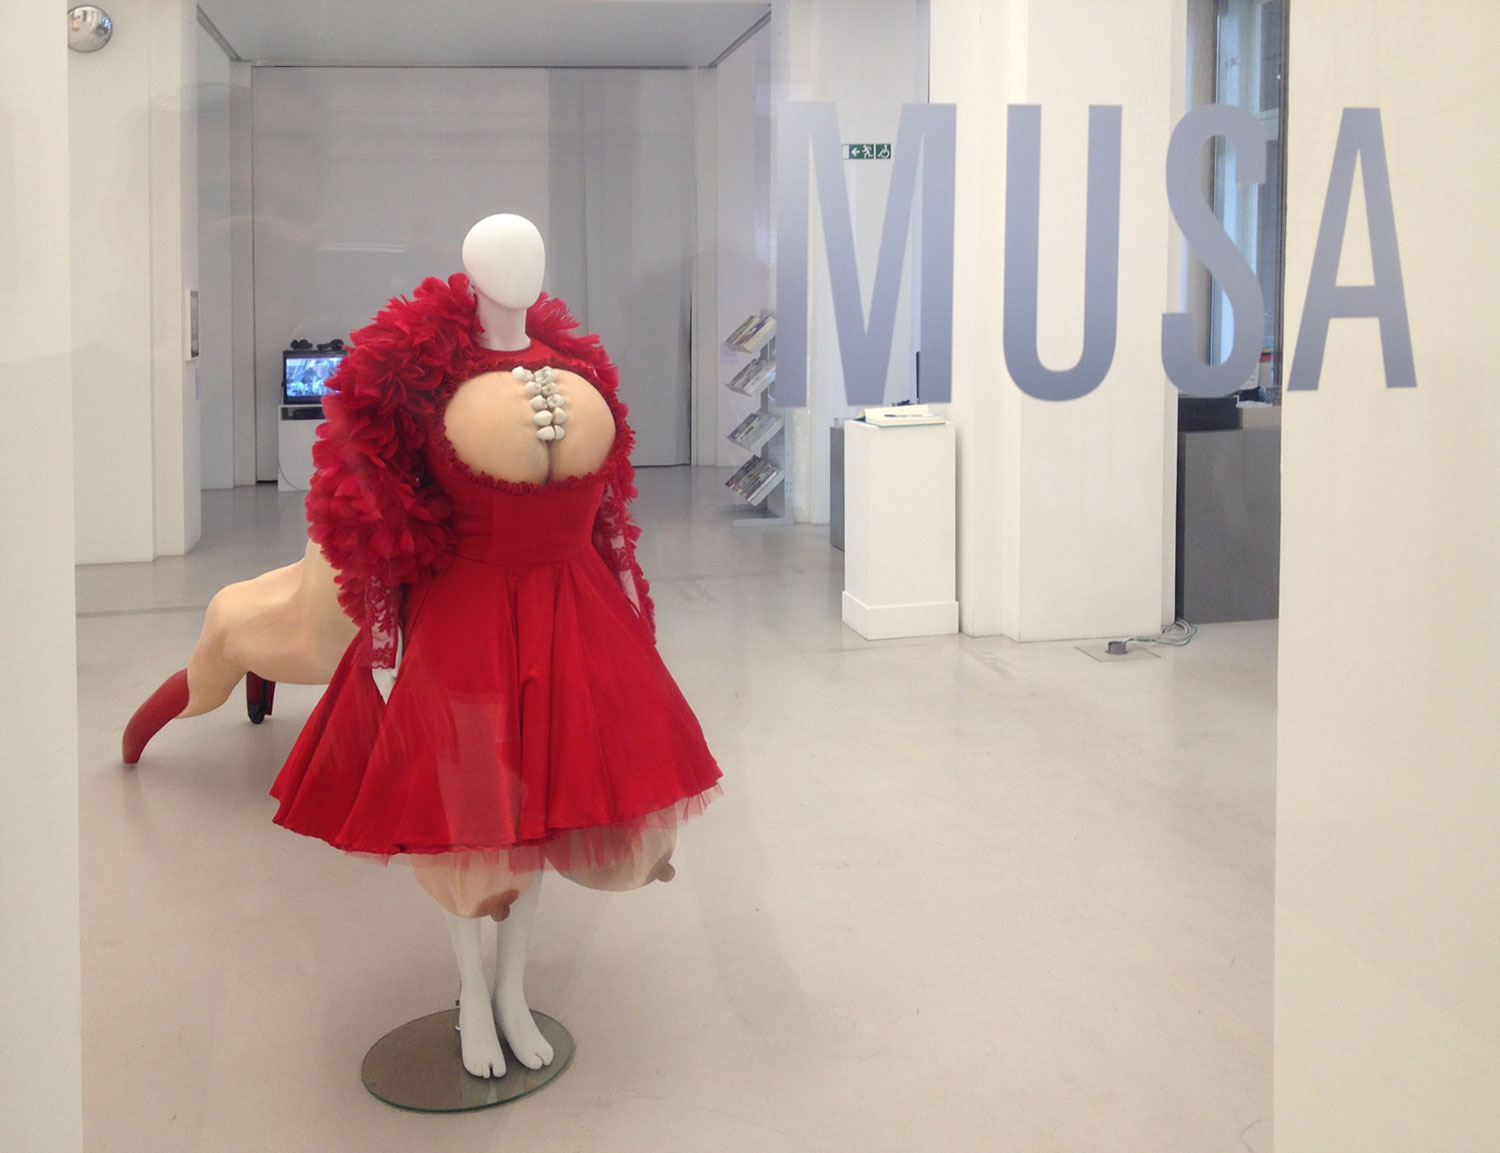 THE MUSETTA SCULPTURE EXHIBITED AT MUSA IN VIENNA